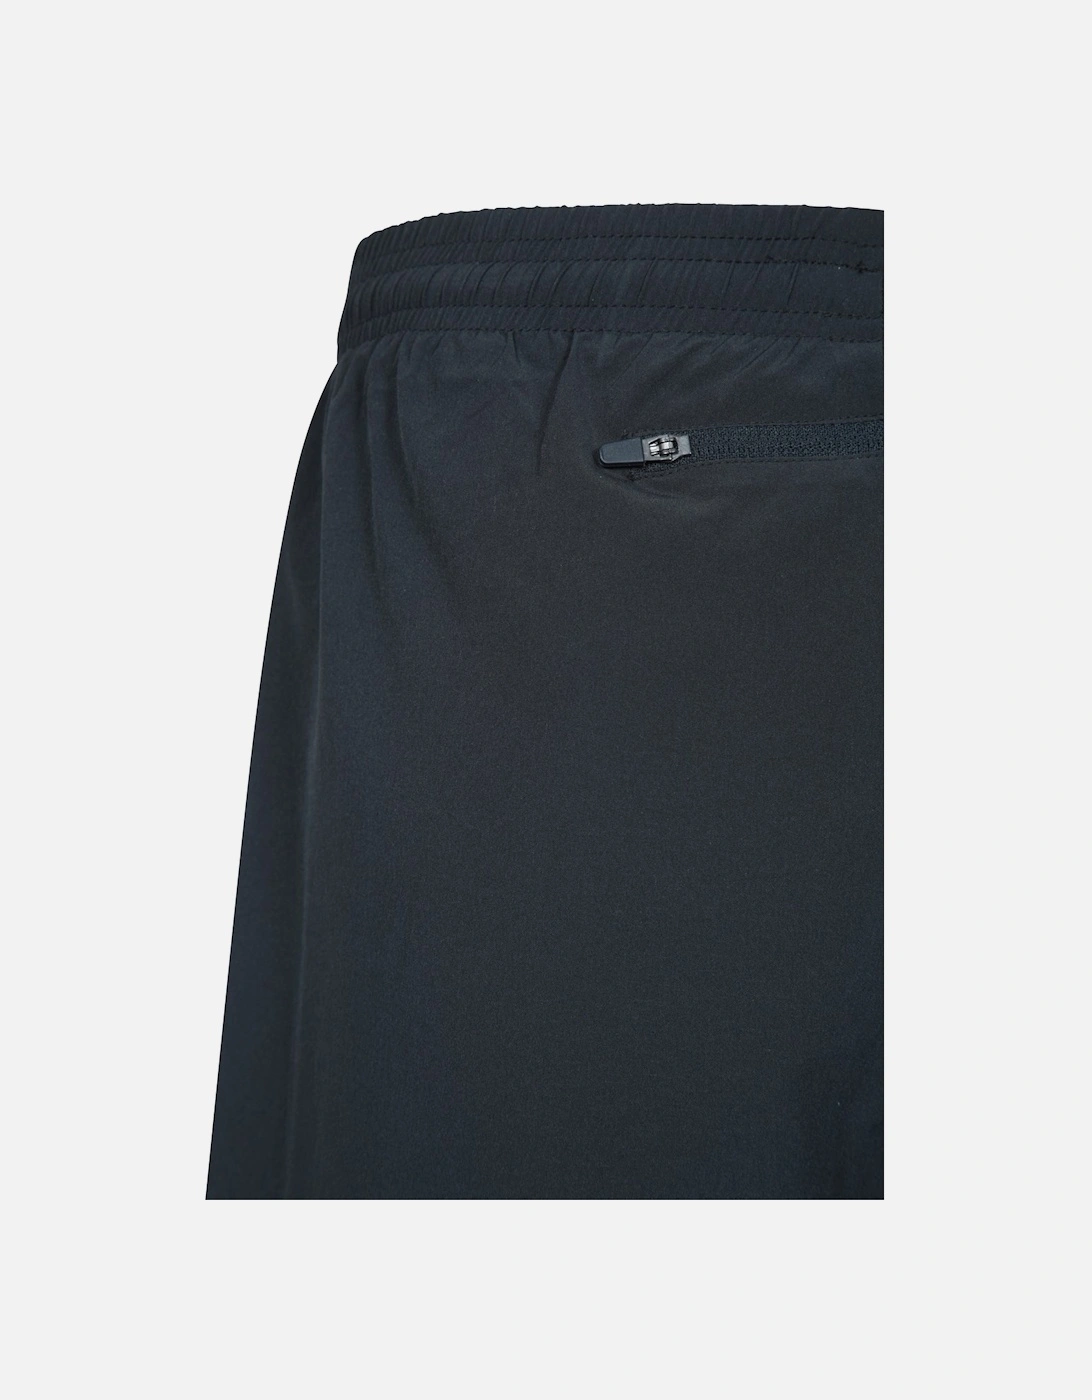 Mens Motion 2 in 1 Shorts